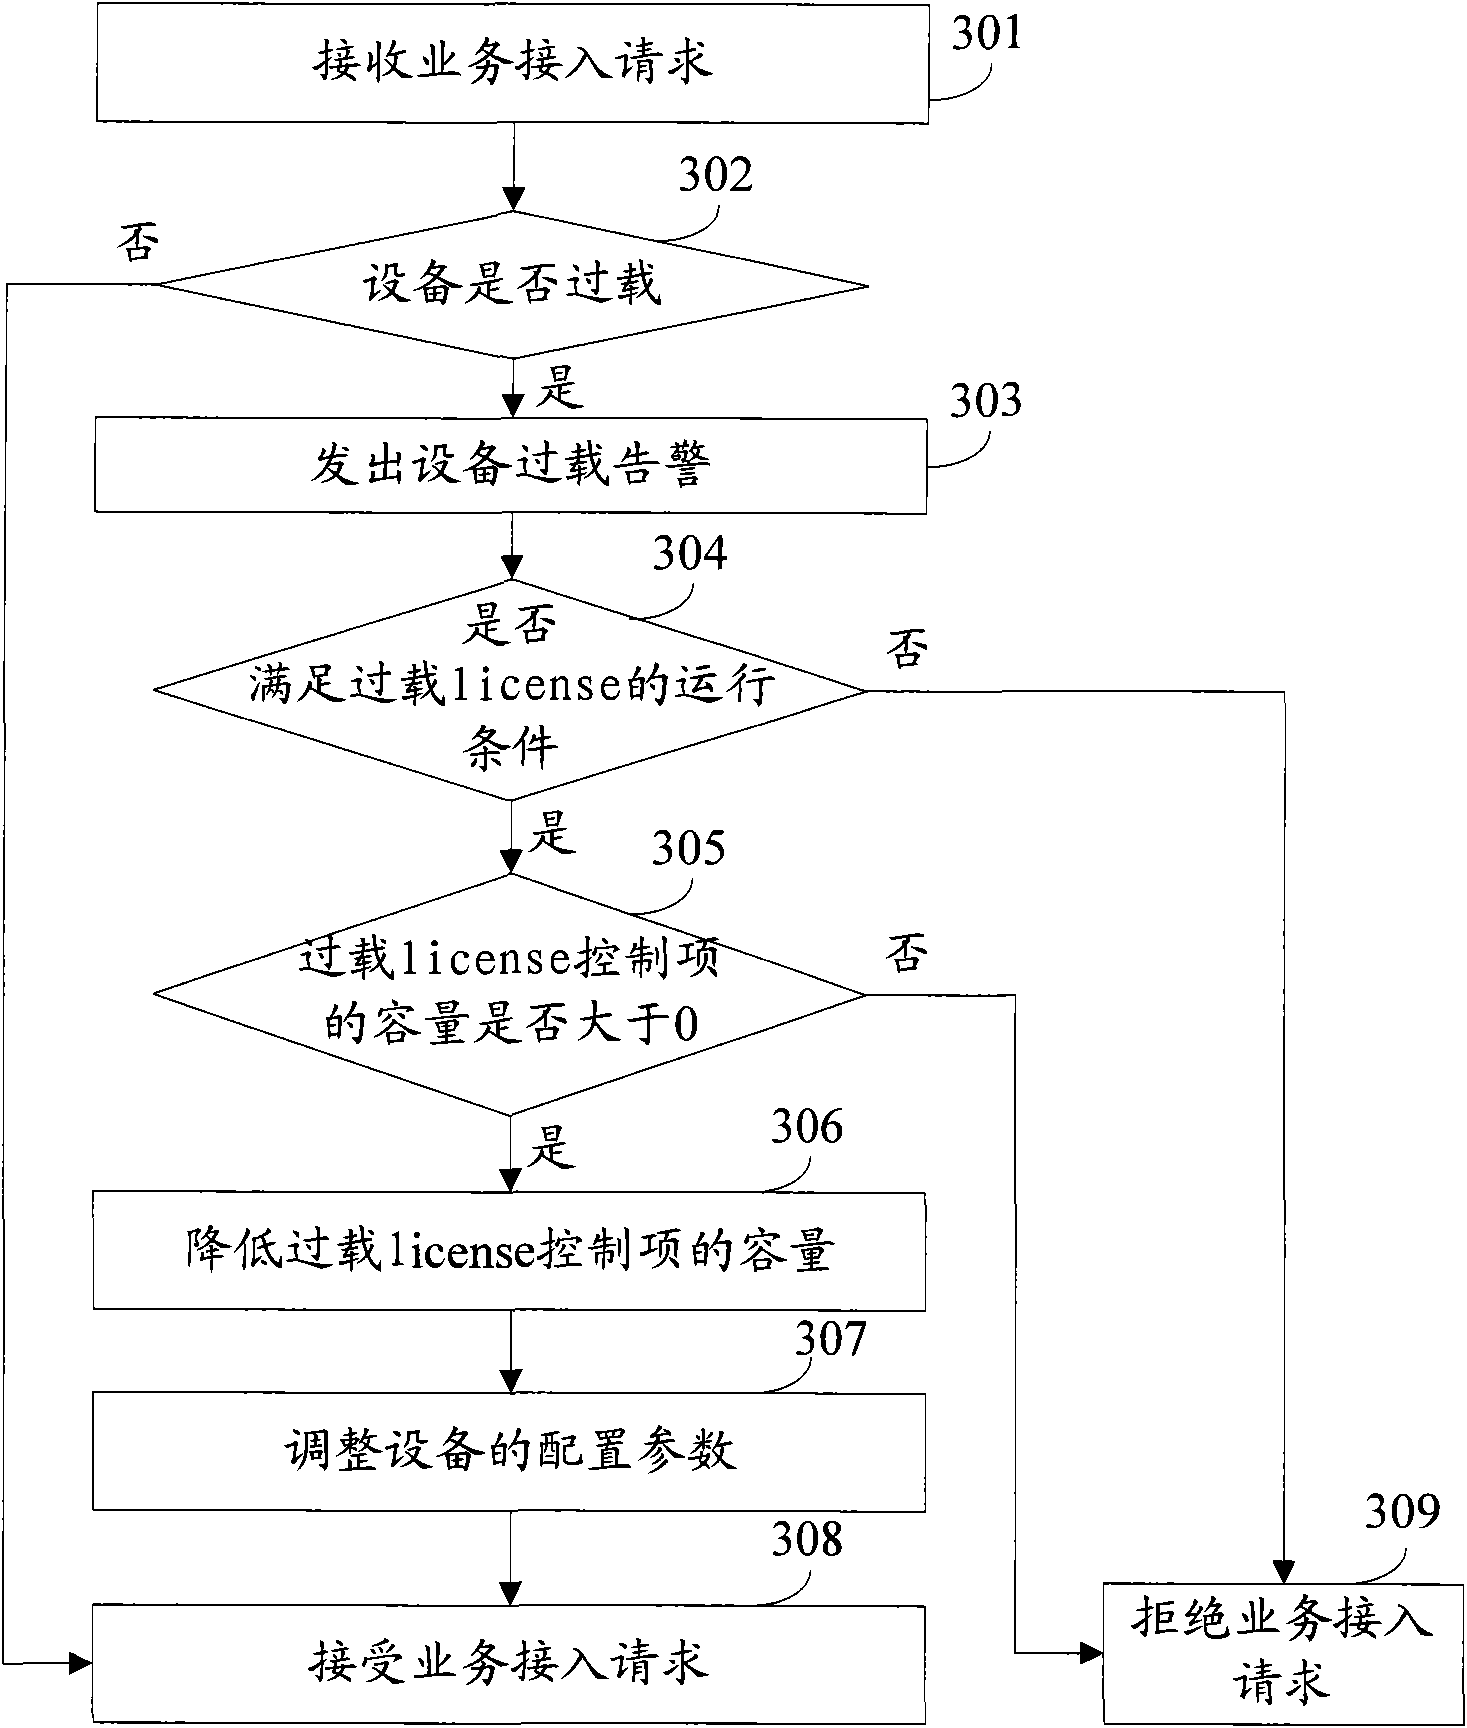 Method and device for processing overloading of communication equipment